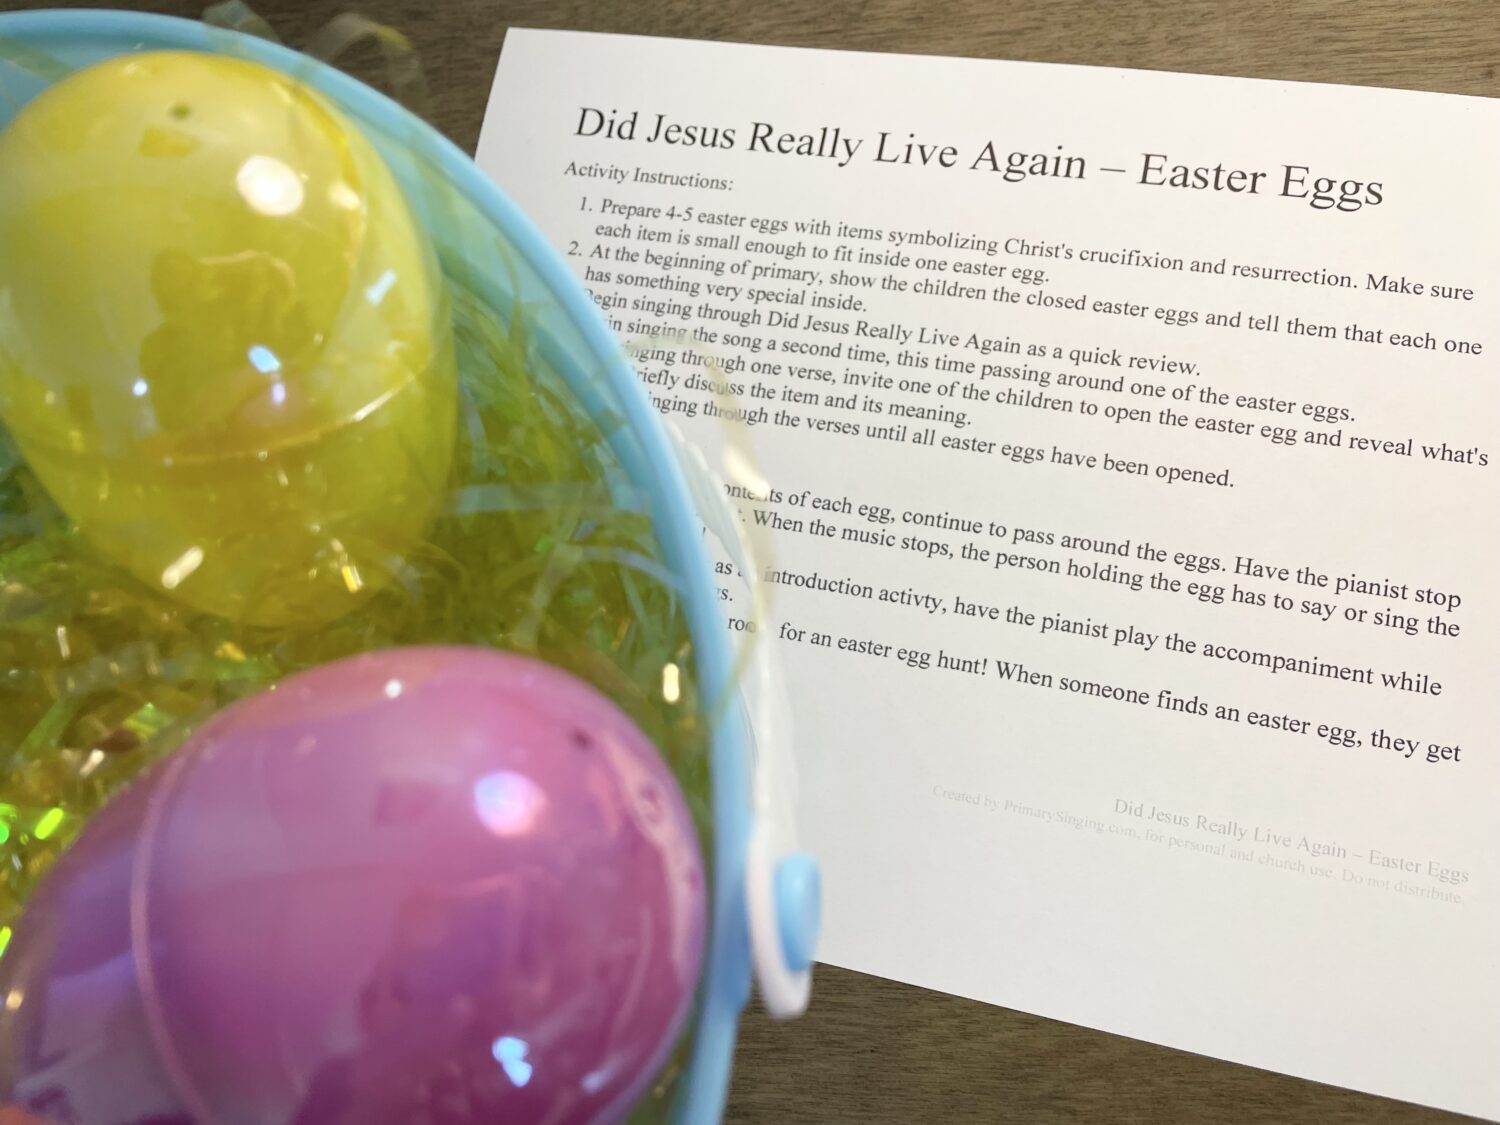 For a fun way to review Did Jesus Really Live Again this month, try out this Did Jesus Really Live Again Easter Eggs activity for singing time. This is activity can be very fun while also bringing the spirit into primary. Includes printable song helps for LDS Primary Music Leaders.